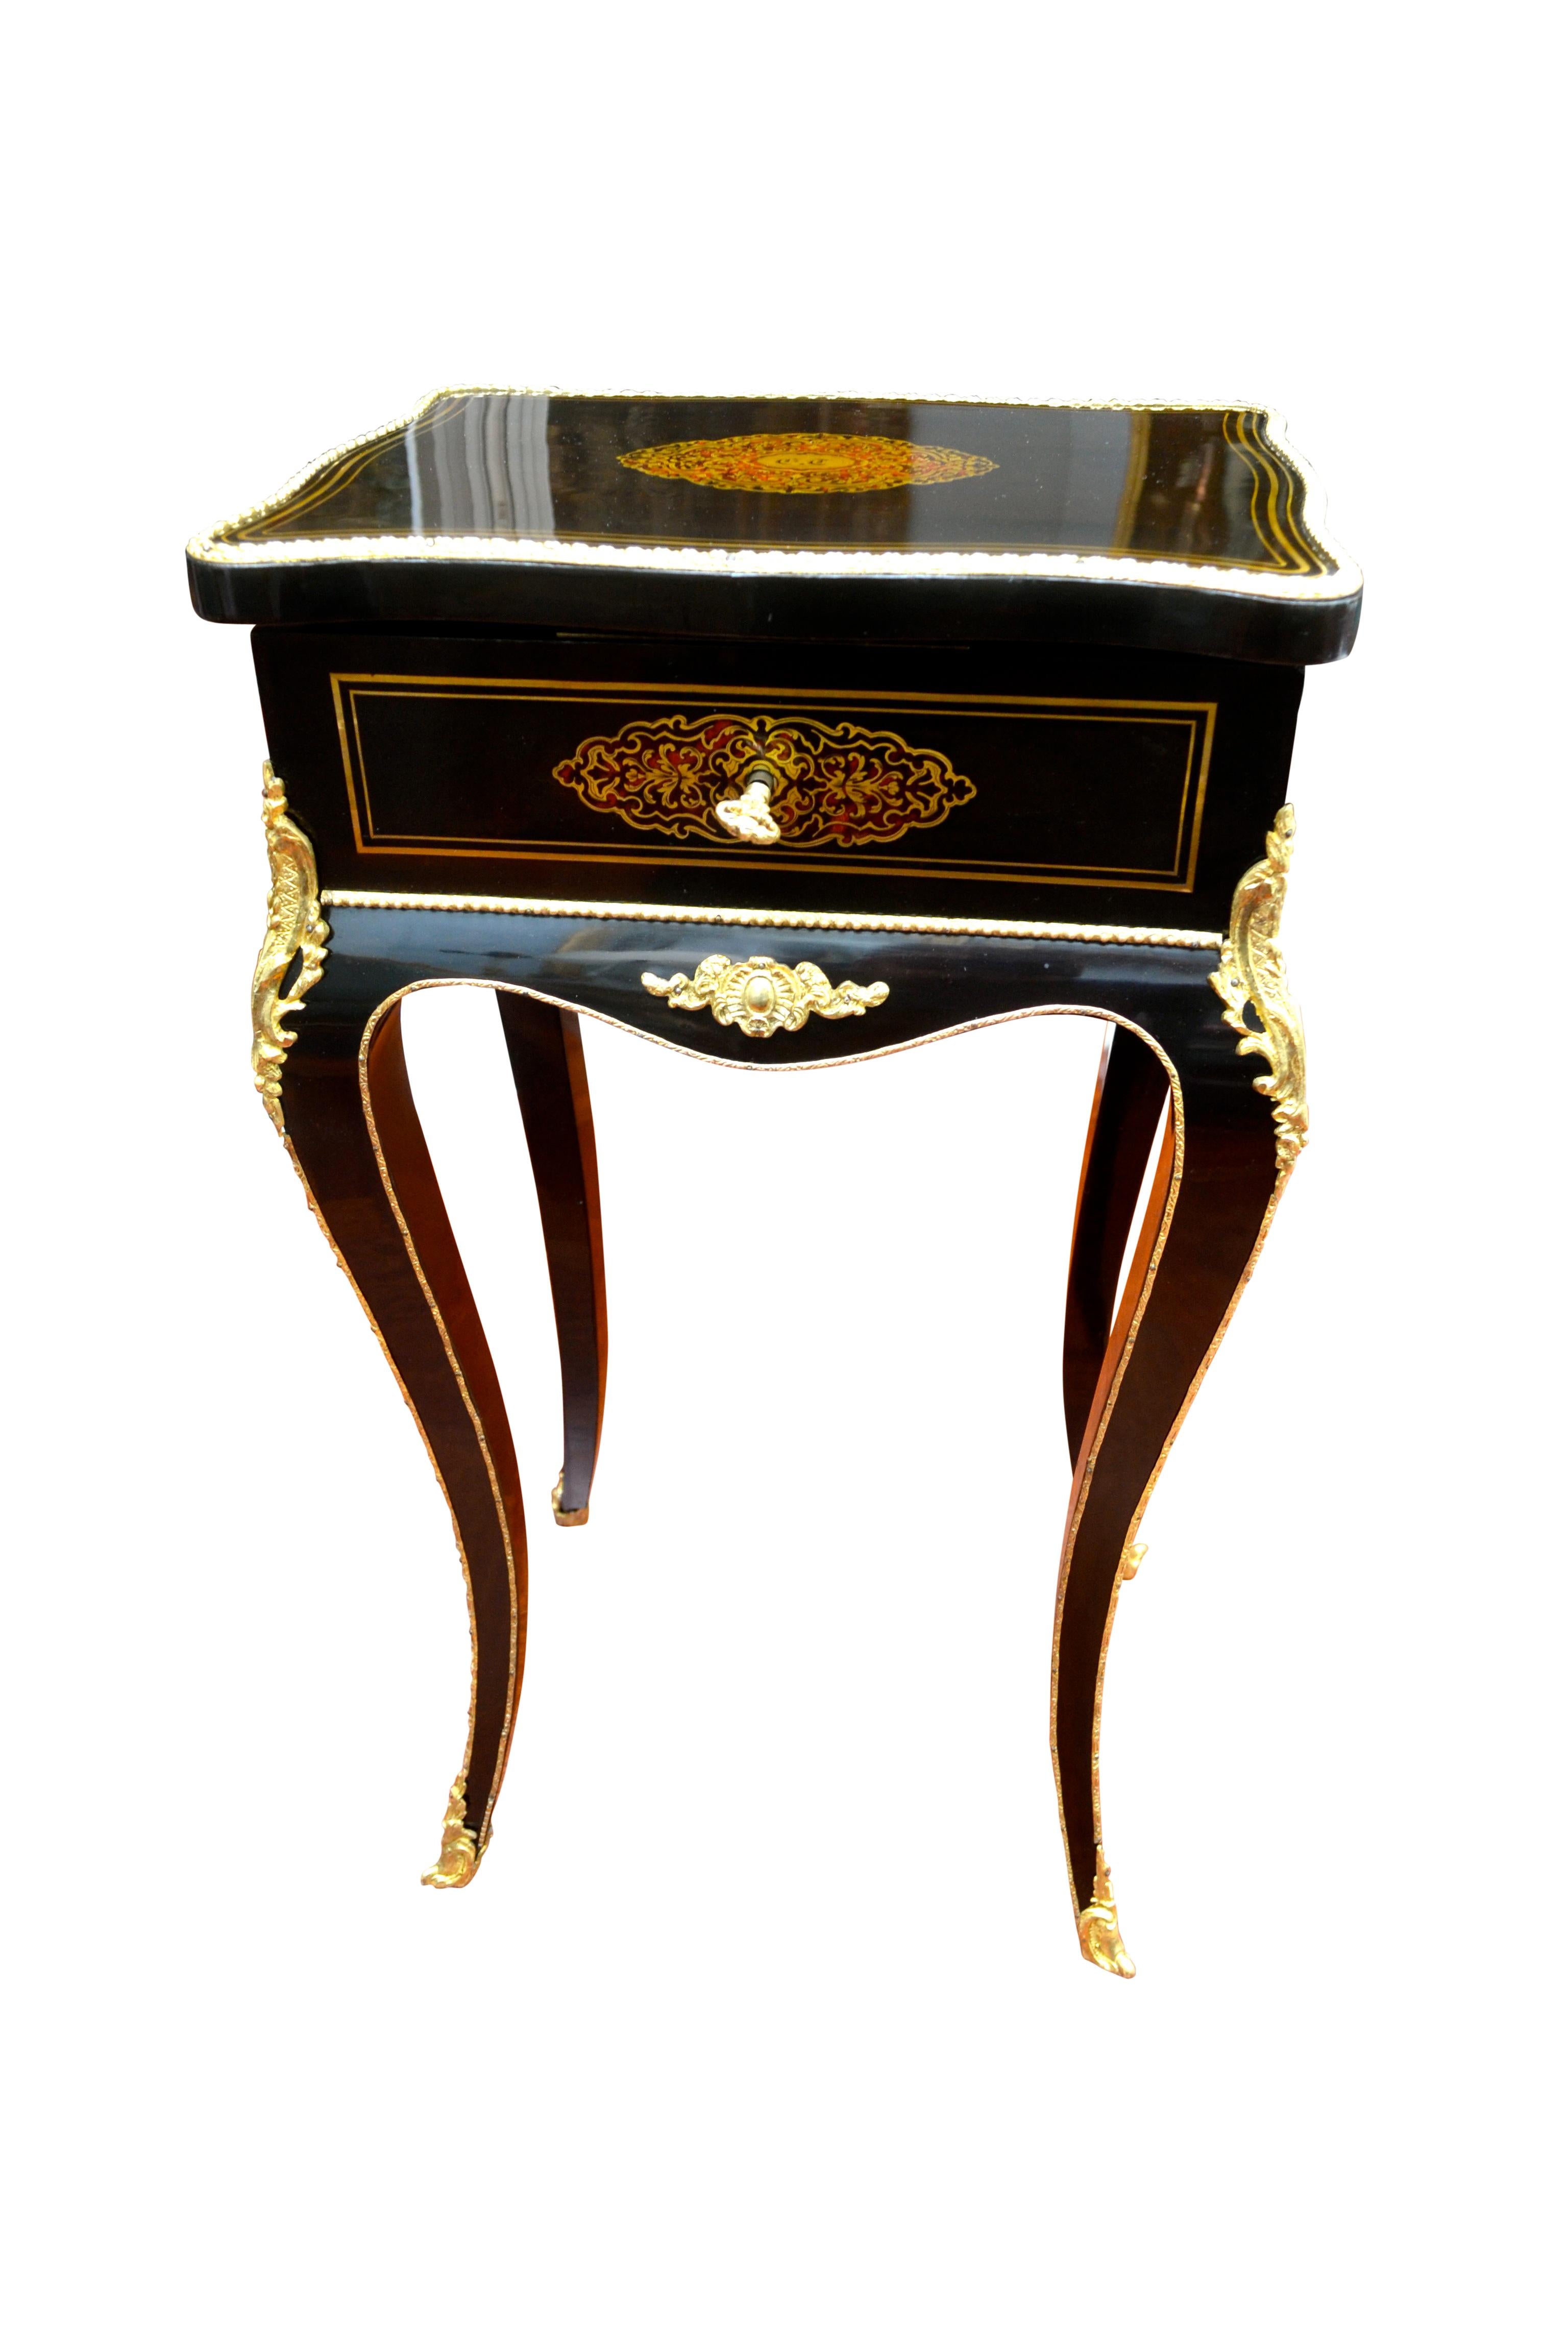 This magnificent jewelry storage and dressing table was produced by the furniture maker Alphonse Tahan (1830-1880), official master cabinetmaker of Napoleon III. The serpentine shaped ebonized top is bordered by ormolu banding around the surface and